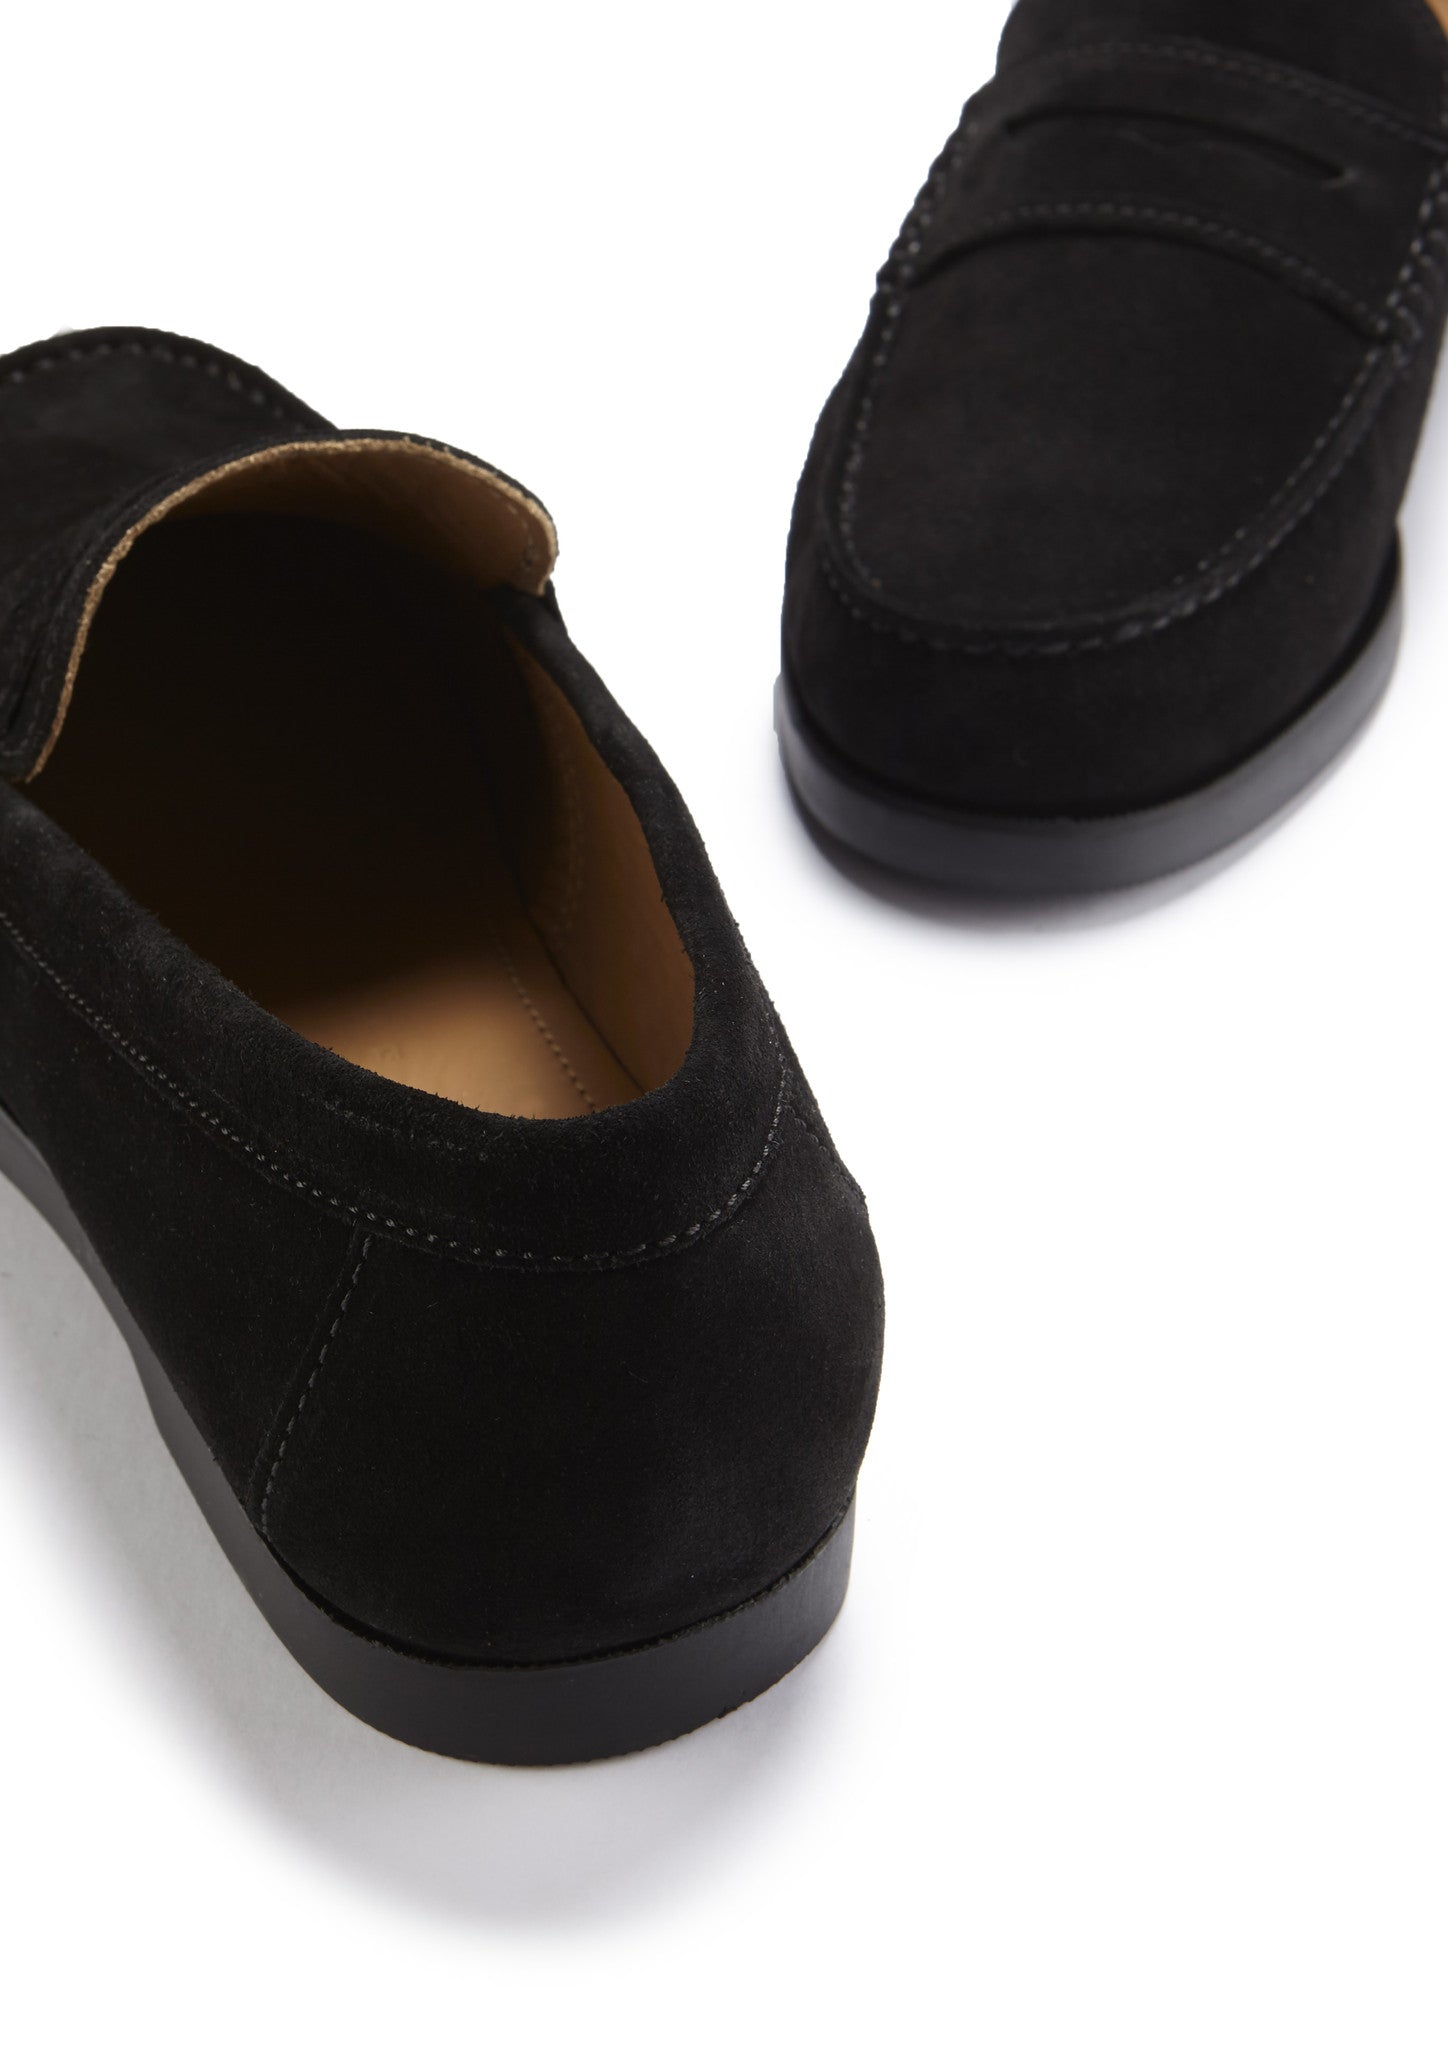 Boat Loafers, black suede